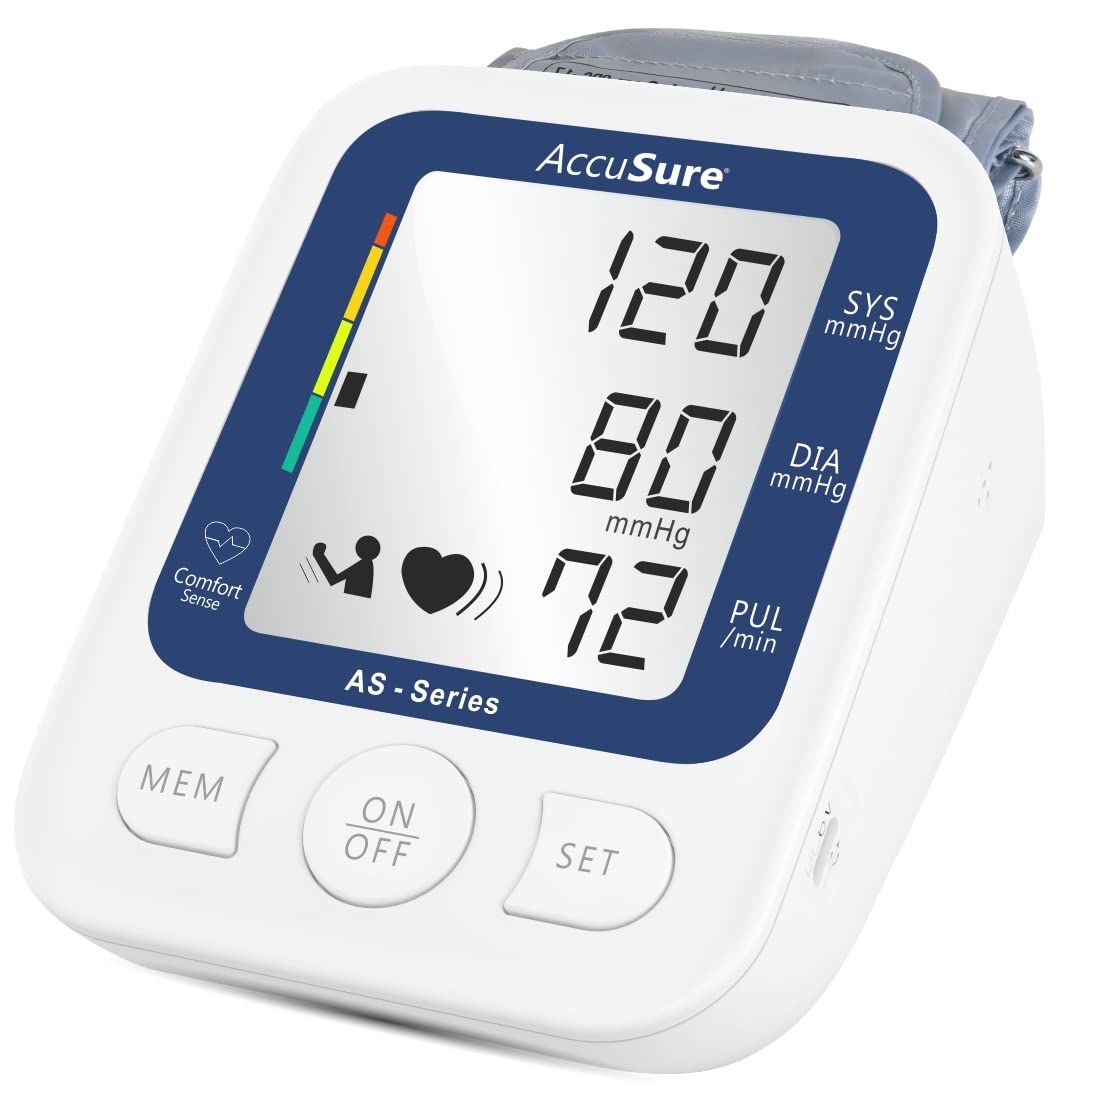 AccuSure AS Series Automatic Blood Pressure Monitor